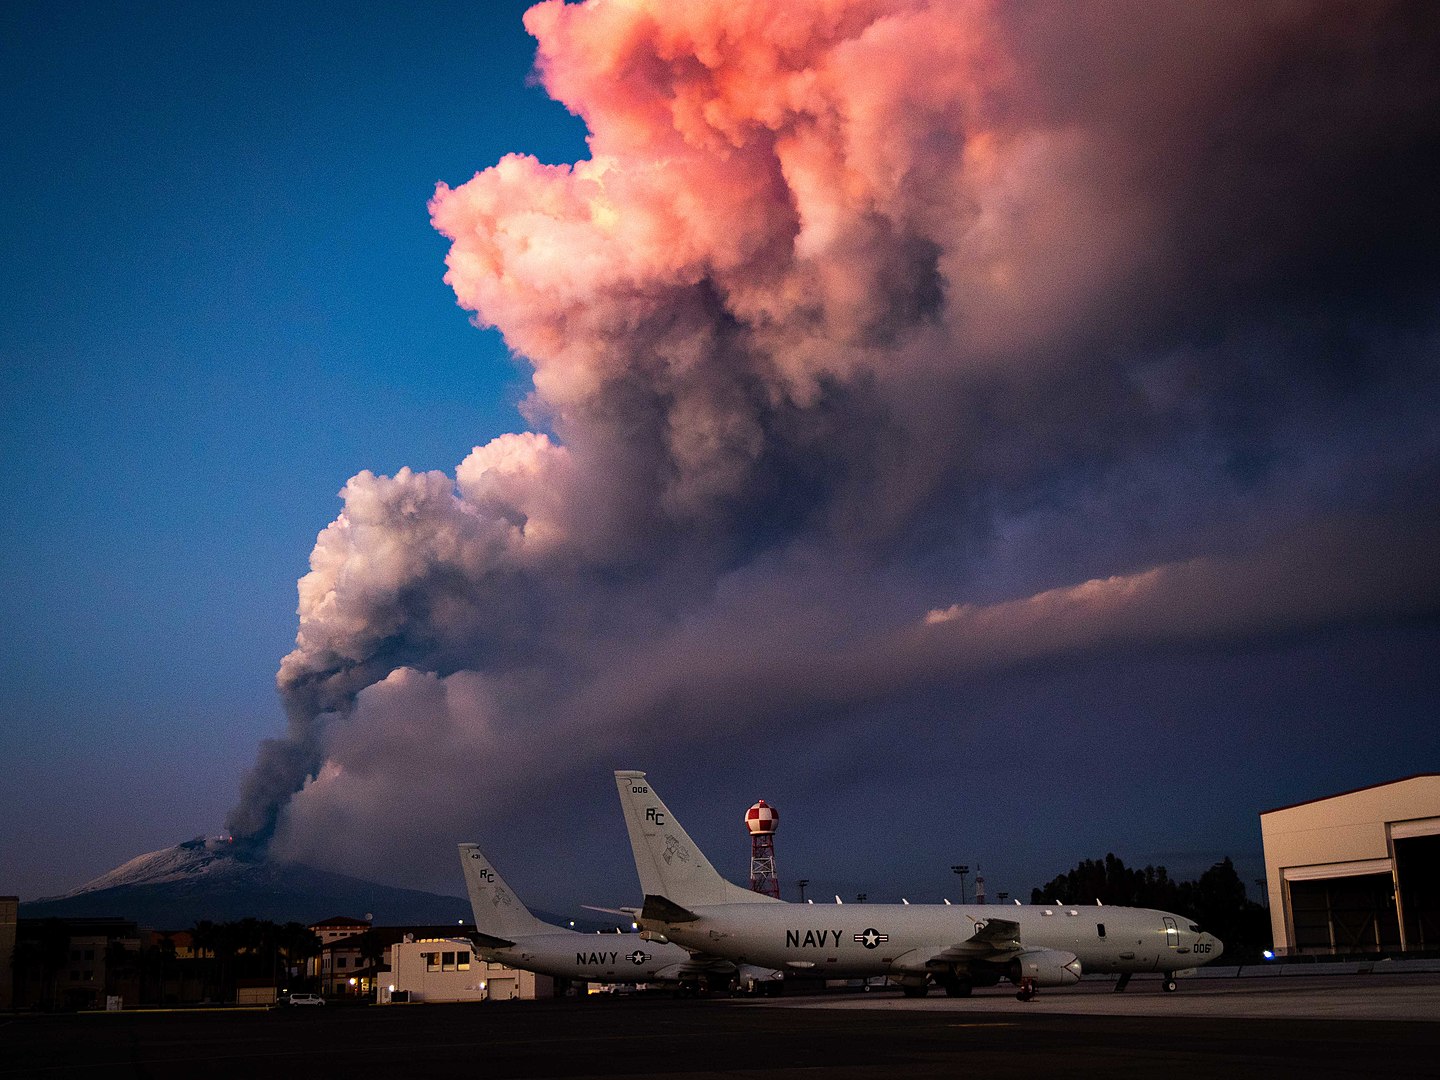 February 2021 eruption seen from Naval Air Station Sigonella